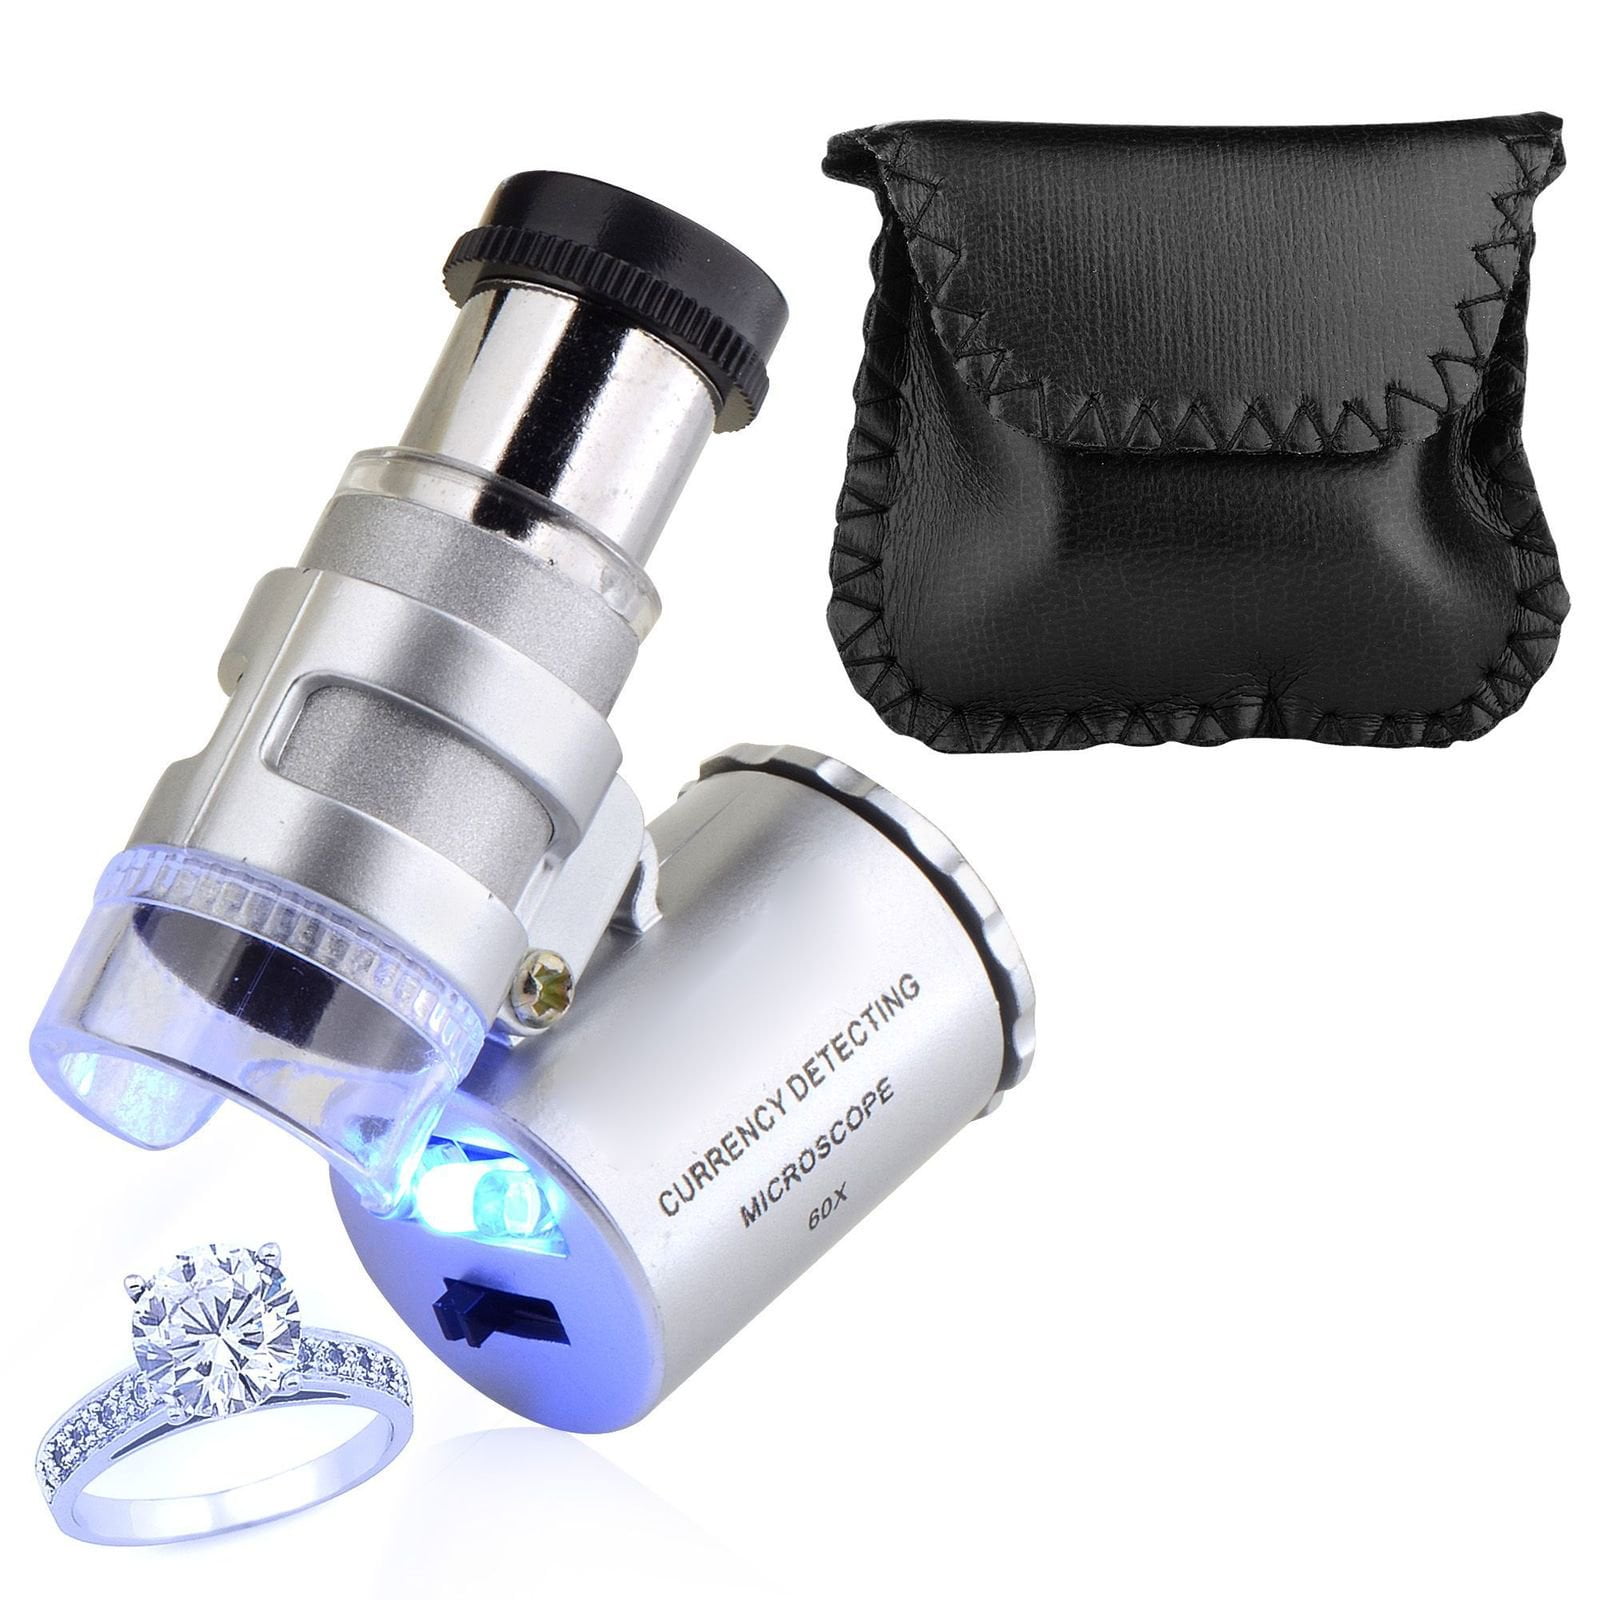 45X Jewelry Magnifying Glass with Led Light Mini Pocket Microscope Magnifier  Illuminated Eye Glass Loupe for Watch Repair - AliExpress